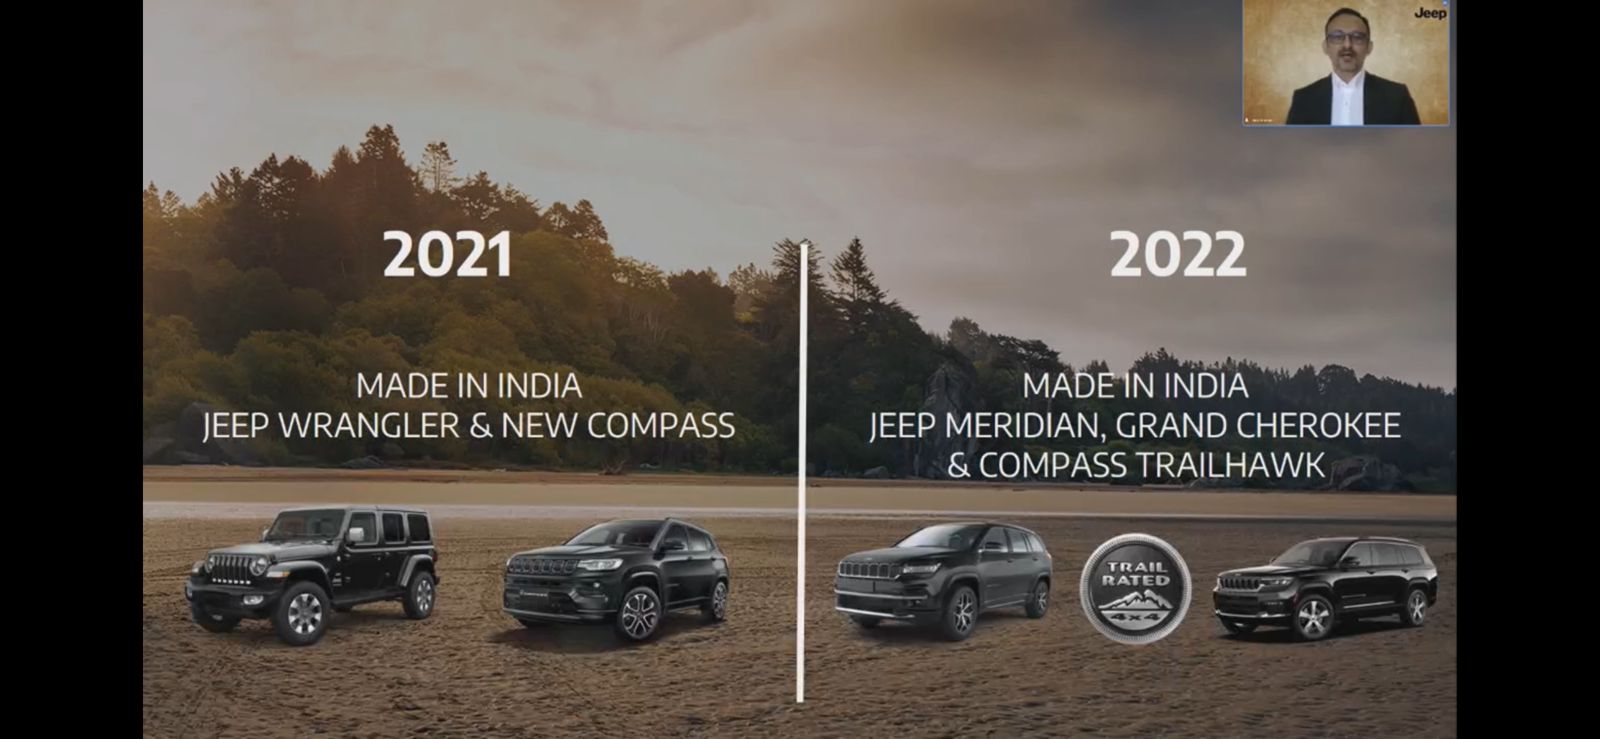 <p>Jeep currently locally assemble the Jeep wrangler and the Jeep Compass in India. They plan on locally assembling the Jeep Meridian, Jeep Cherokee and Jeep Compass Trailhawk as well.</p>